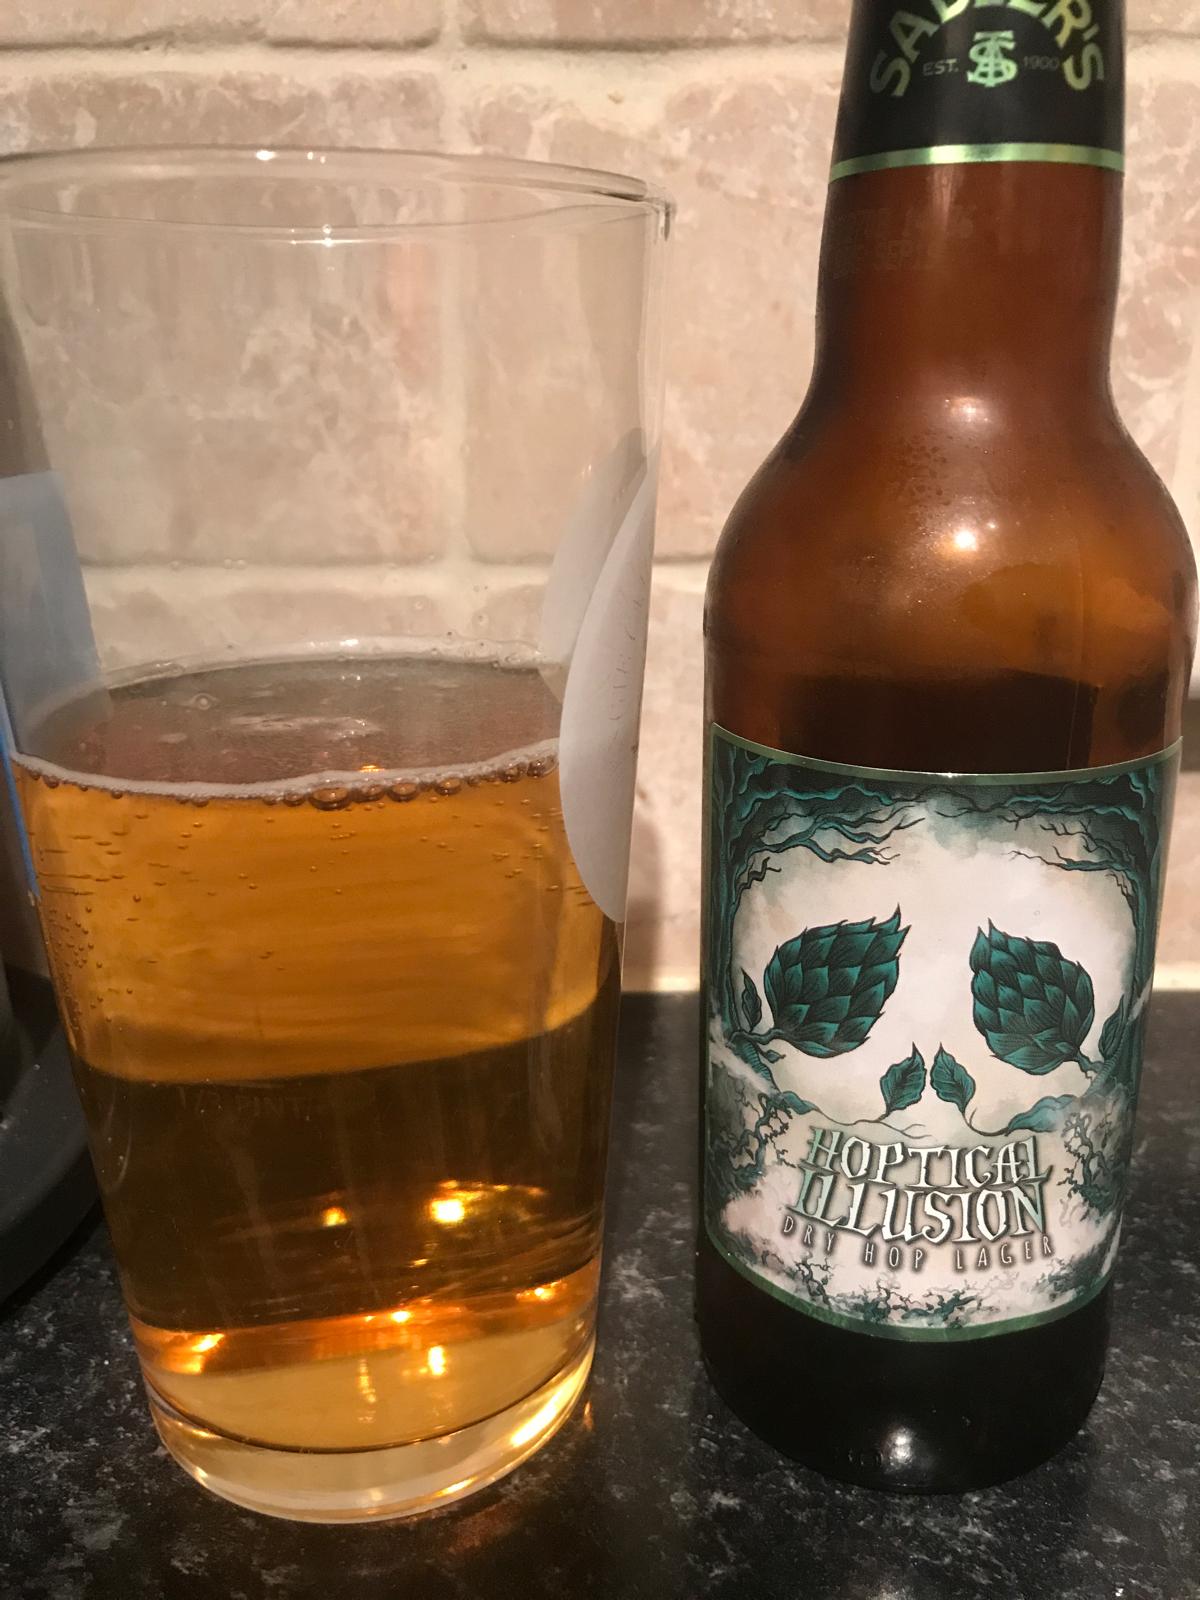 Hoptical Illusion Dry Hop Lager